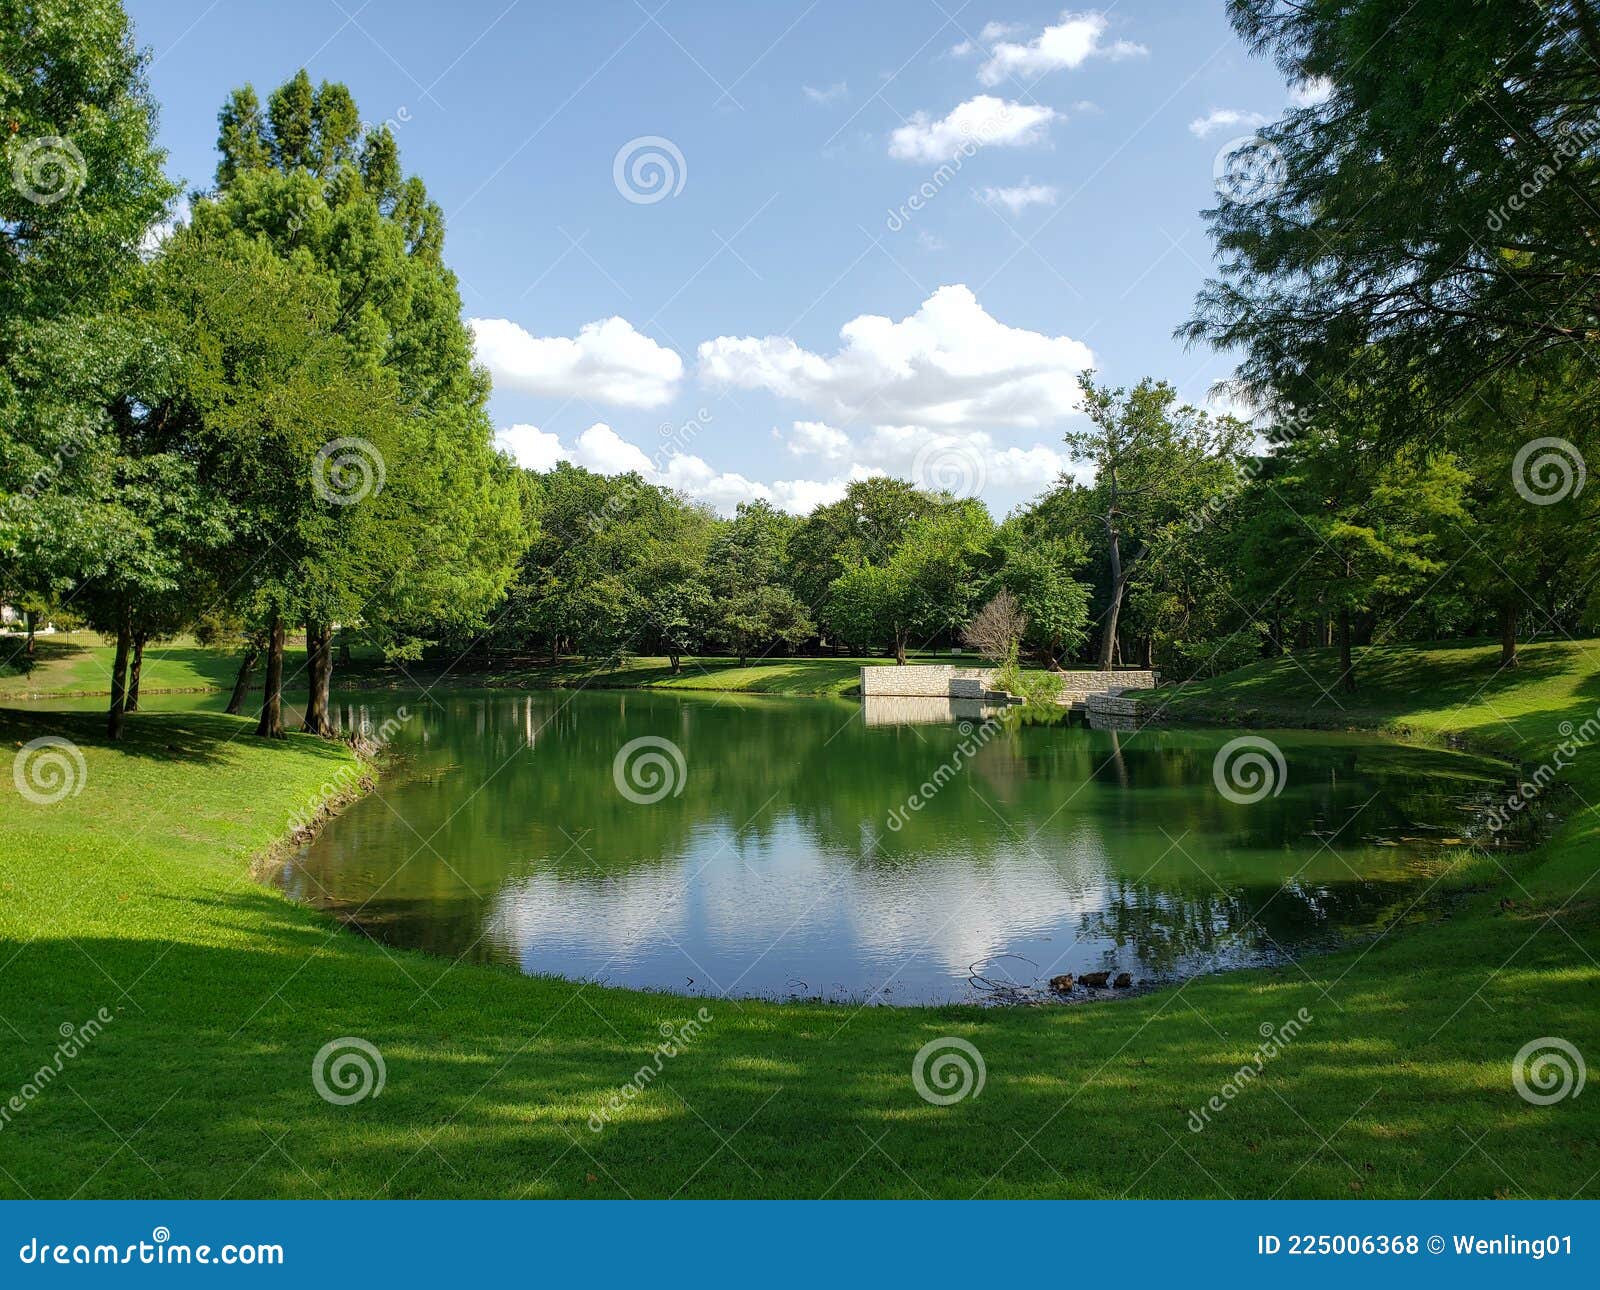 lake and trees in community park city plano tx usa